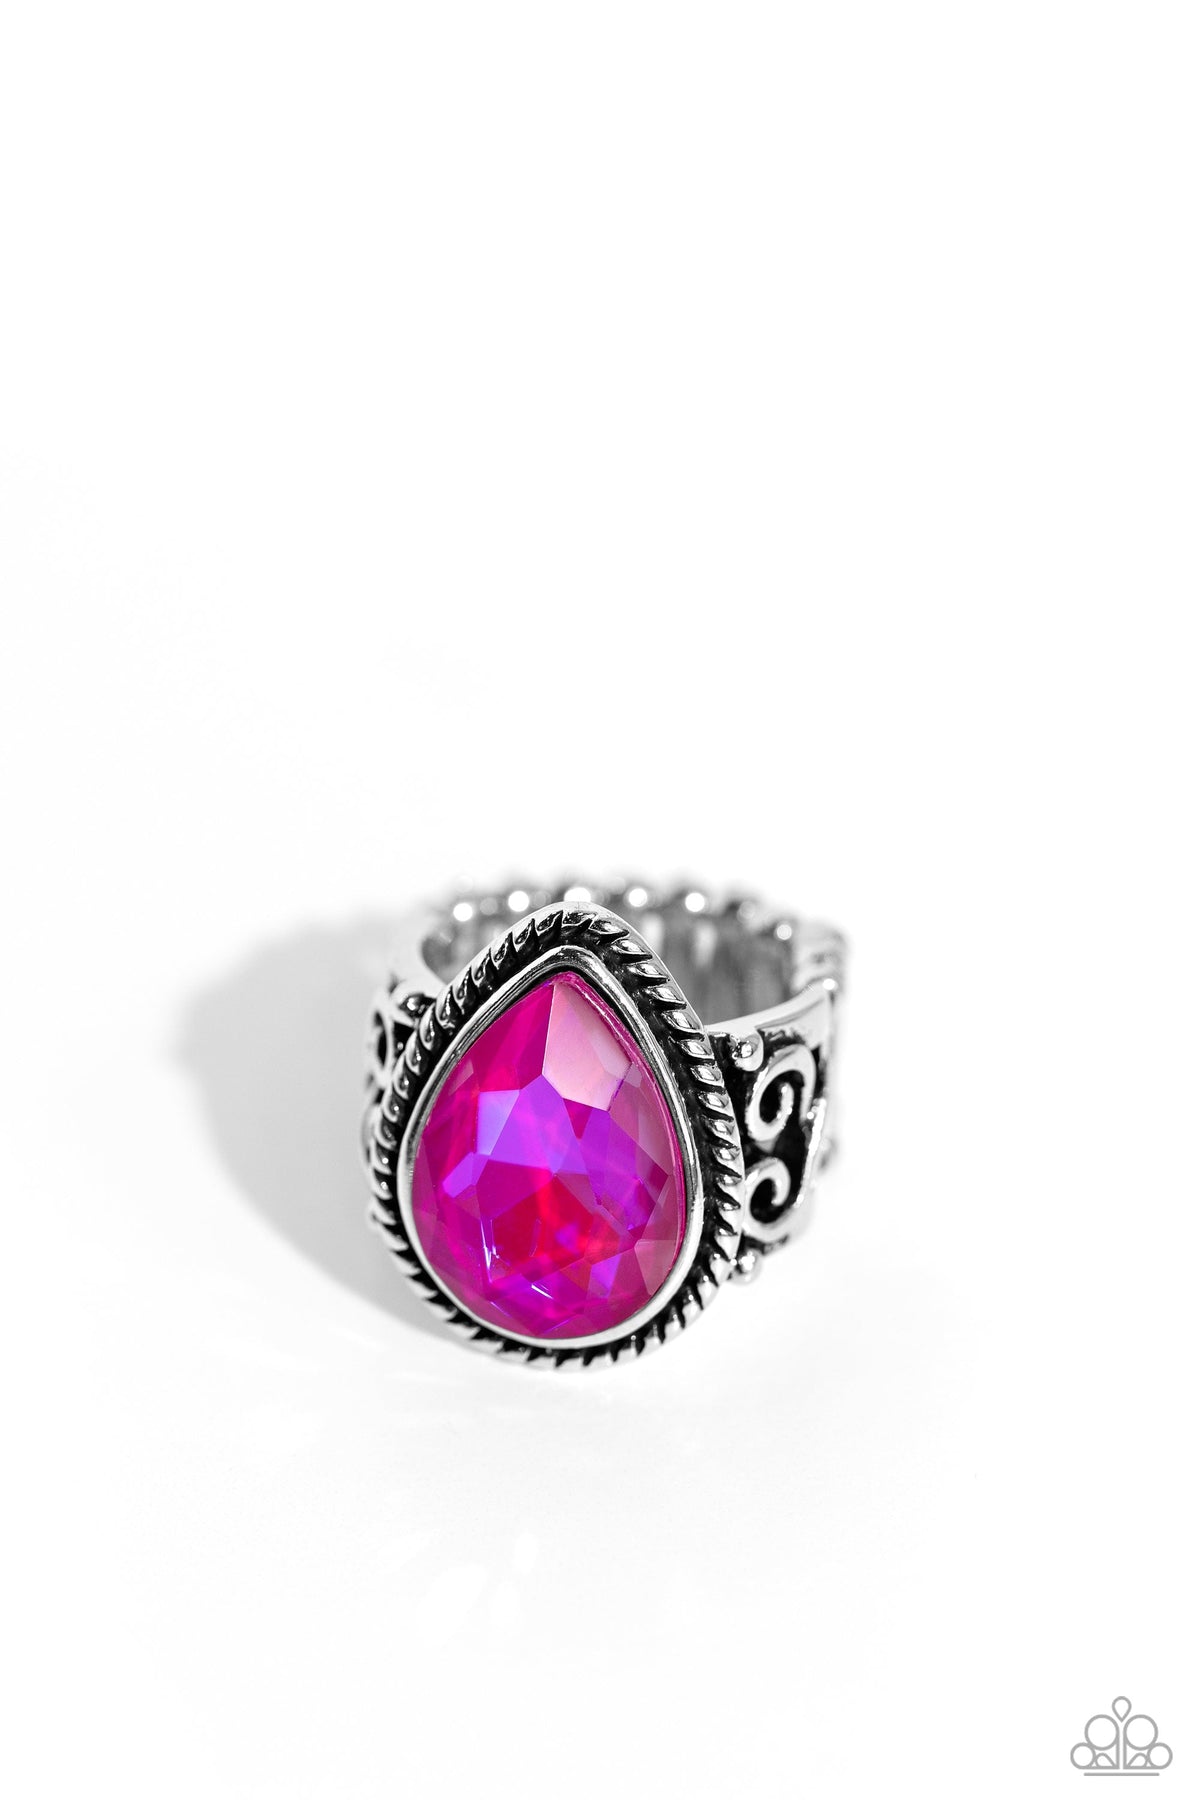 Supernatural Sparkle Pink UV Shimmer Rhinestone Ring - Paparazzi Accessories- lightbox - CarasShop.com - $5 Jewelry by Cara Jewels